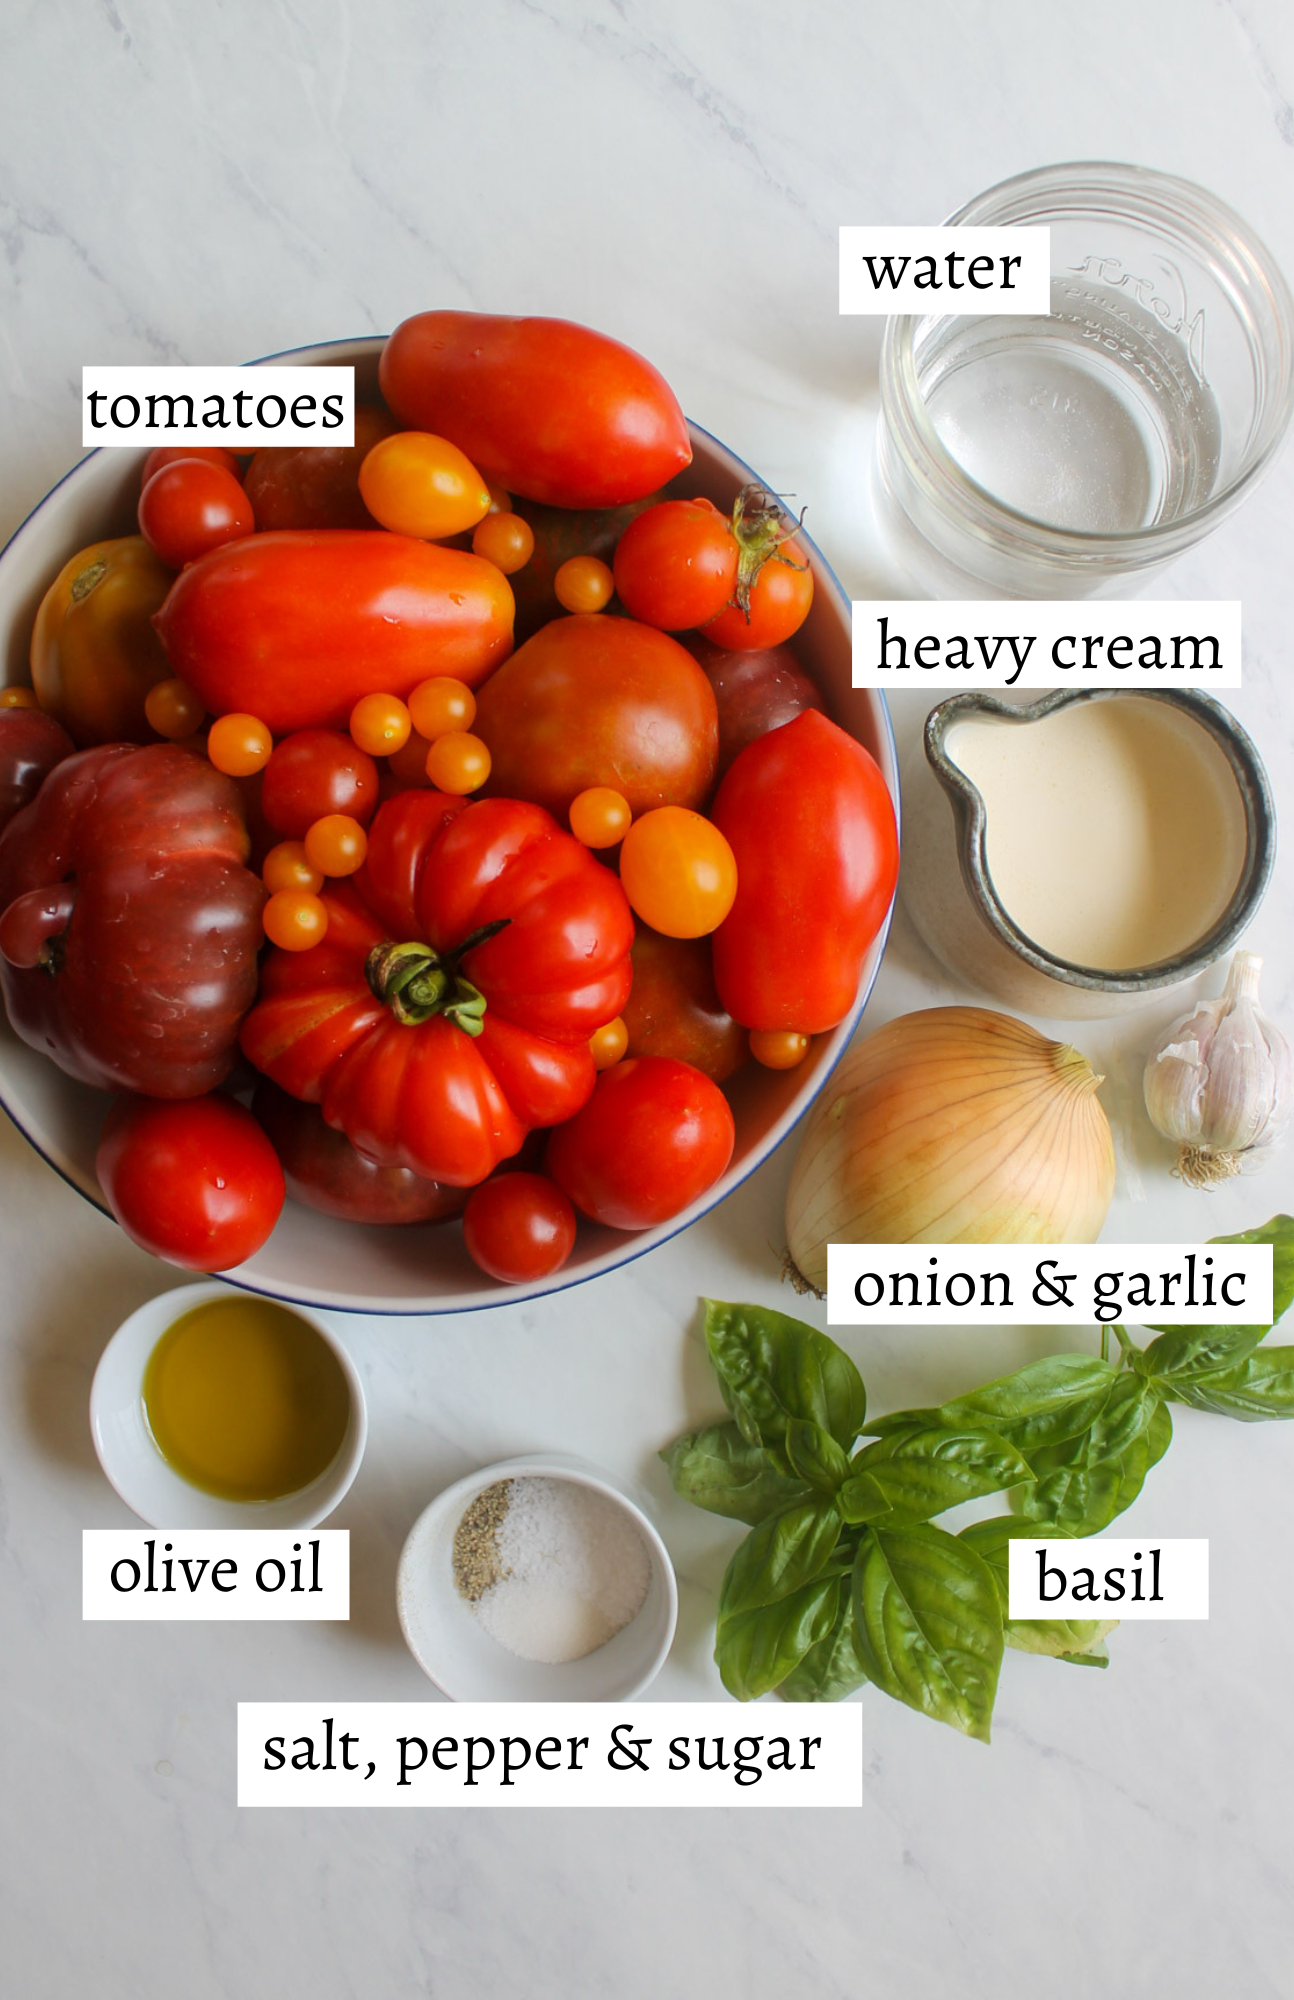 Labeled ingredients for roasted tomato soup from garden fresh tomatoes.